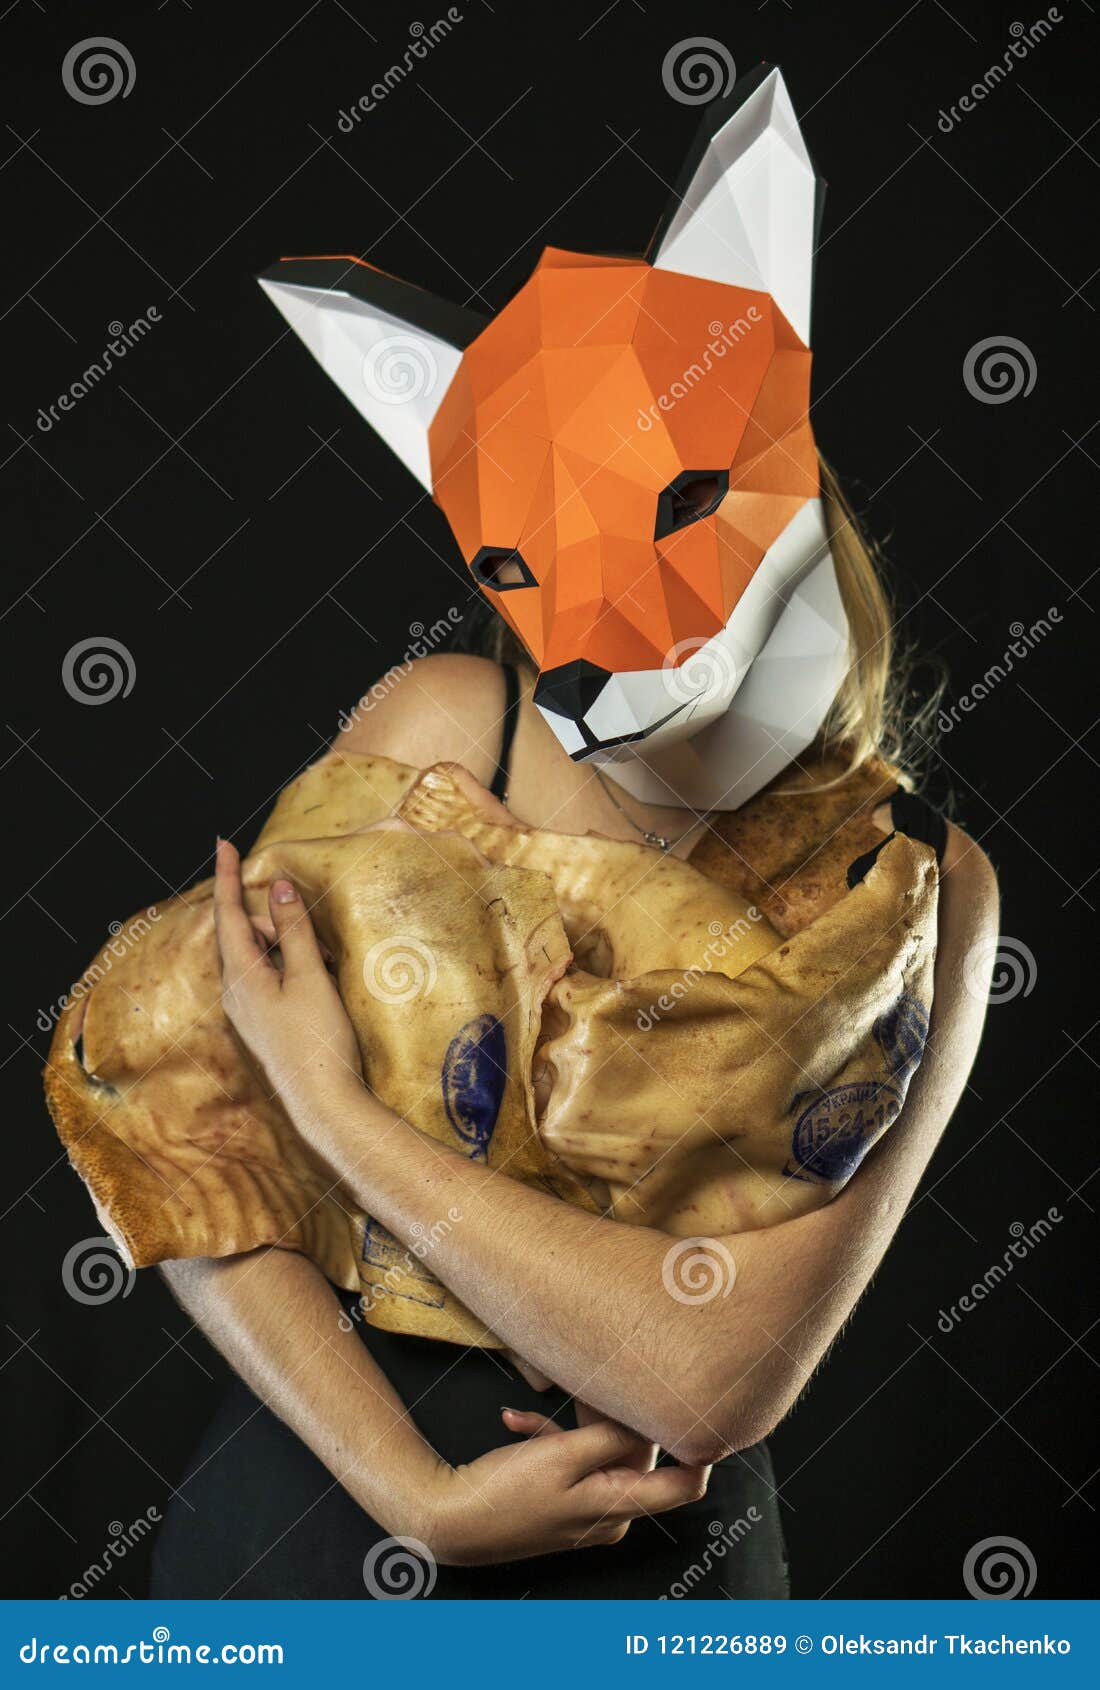 Blonde Girl with Fox Mask Paper Using Pig Skin for Covering. Dead Animal  Consumer Stock Image - Image of blanket, identity: 121226889